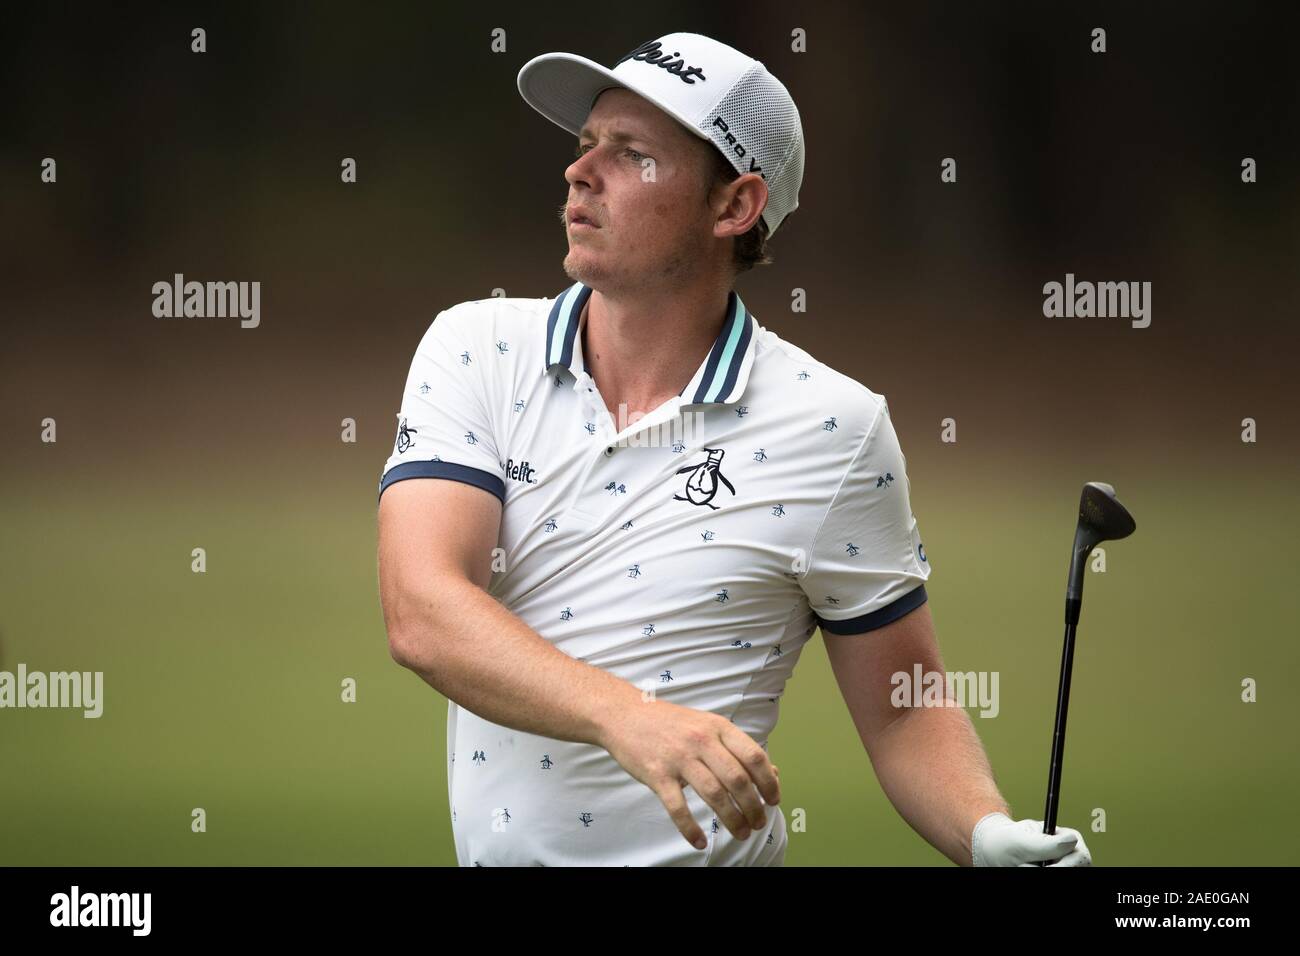 Sydney, Australia. 06th Dec, 2019. Cameron Smith of Queensland during the 104th Emirates Australian Open at The Australian Golf Club, Sydney, Australia on 6 December 2019